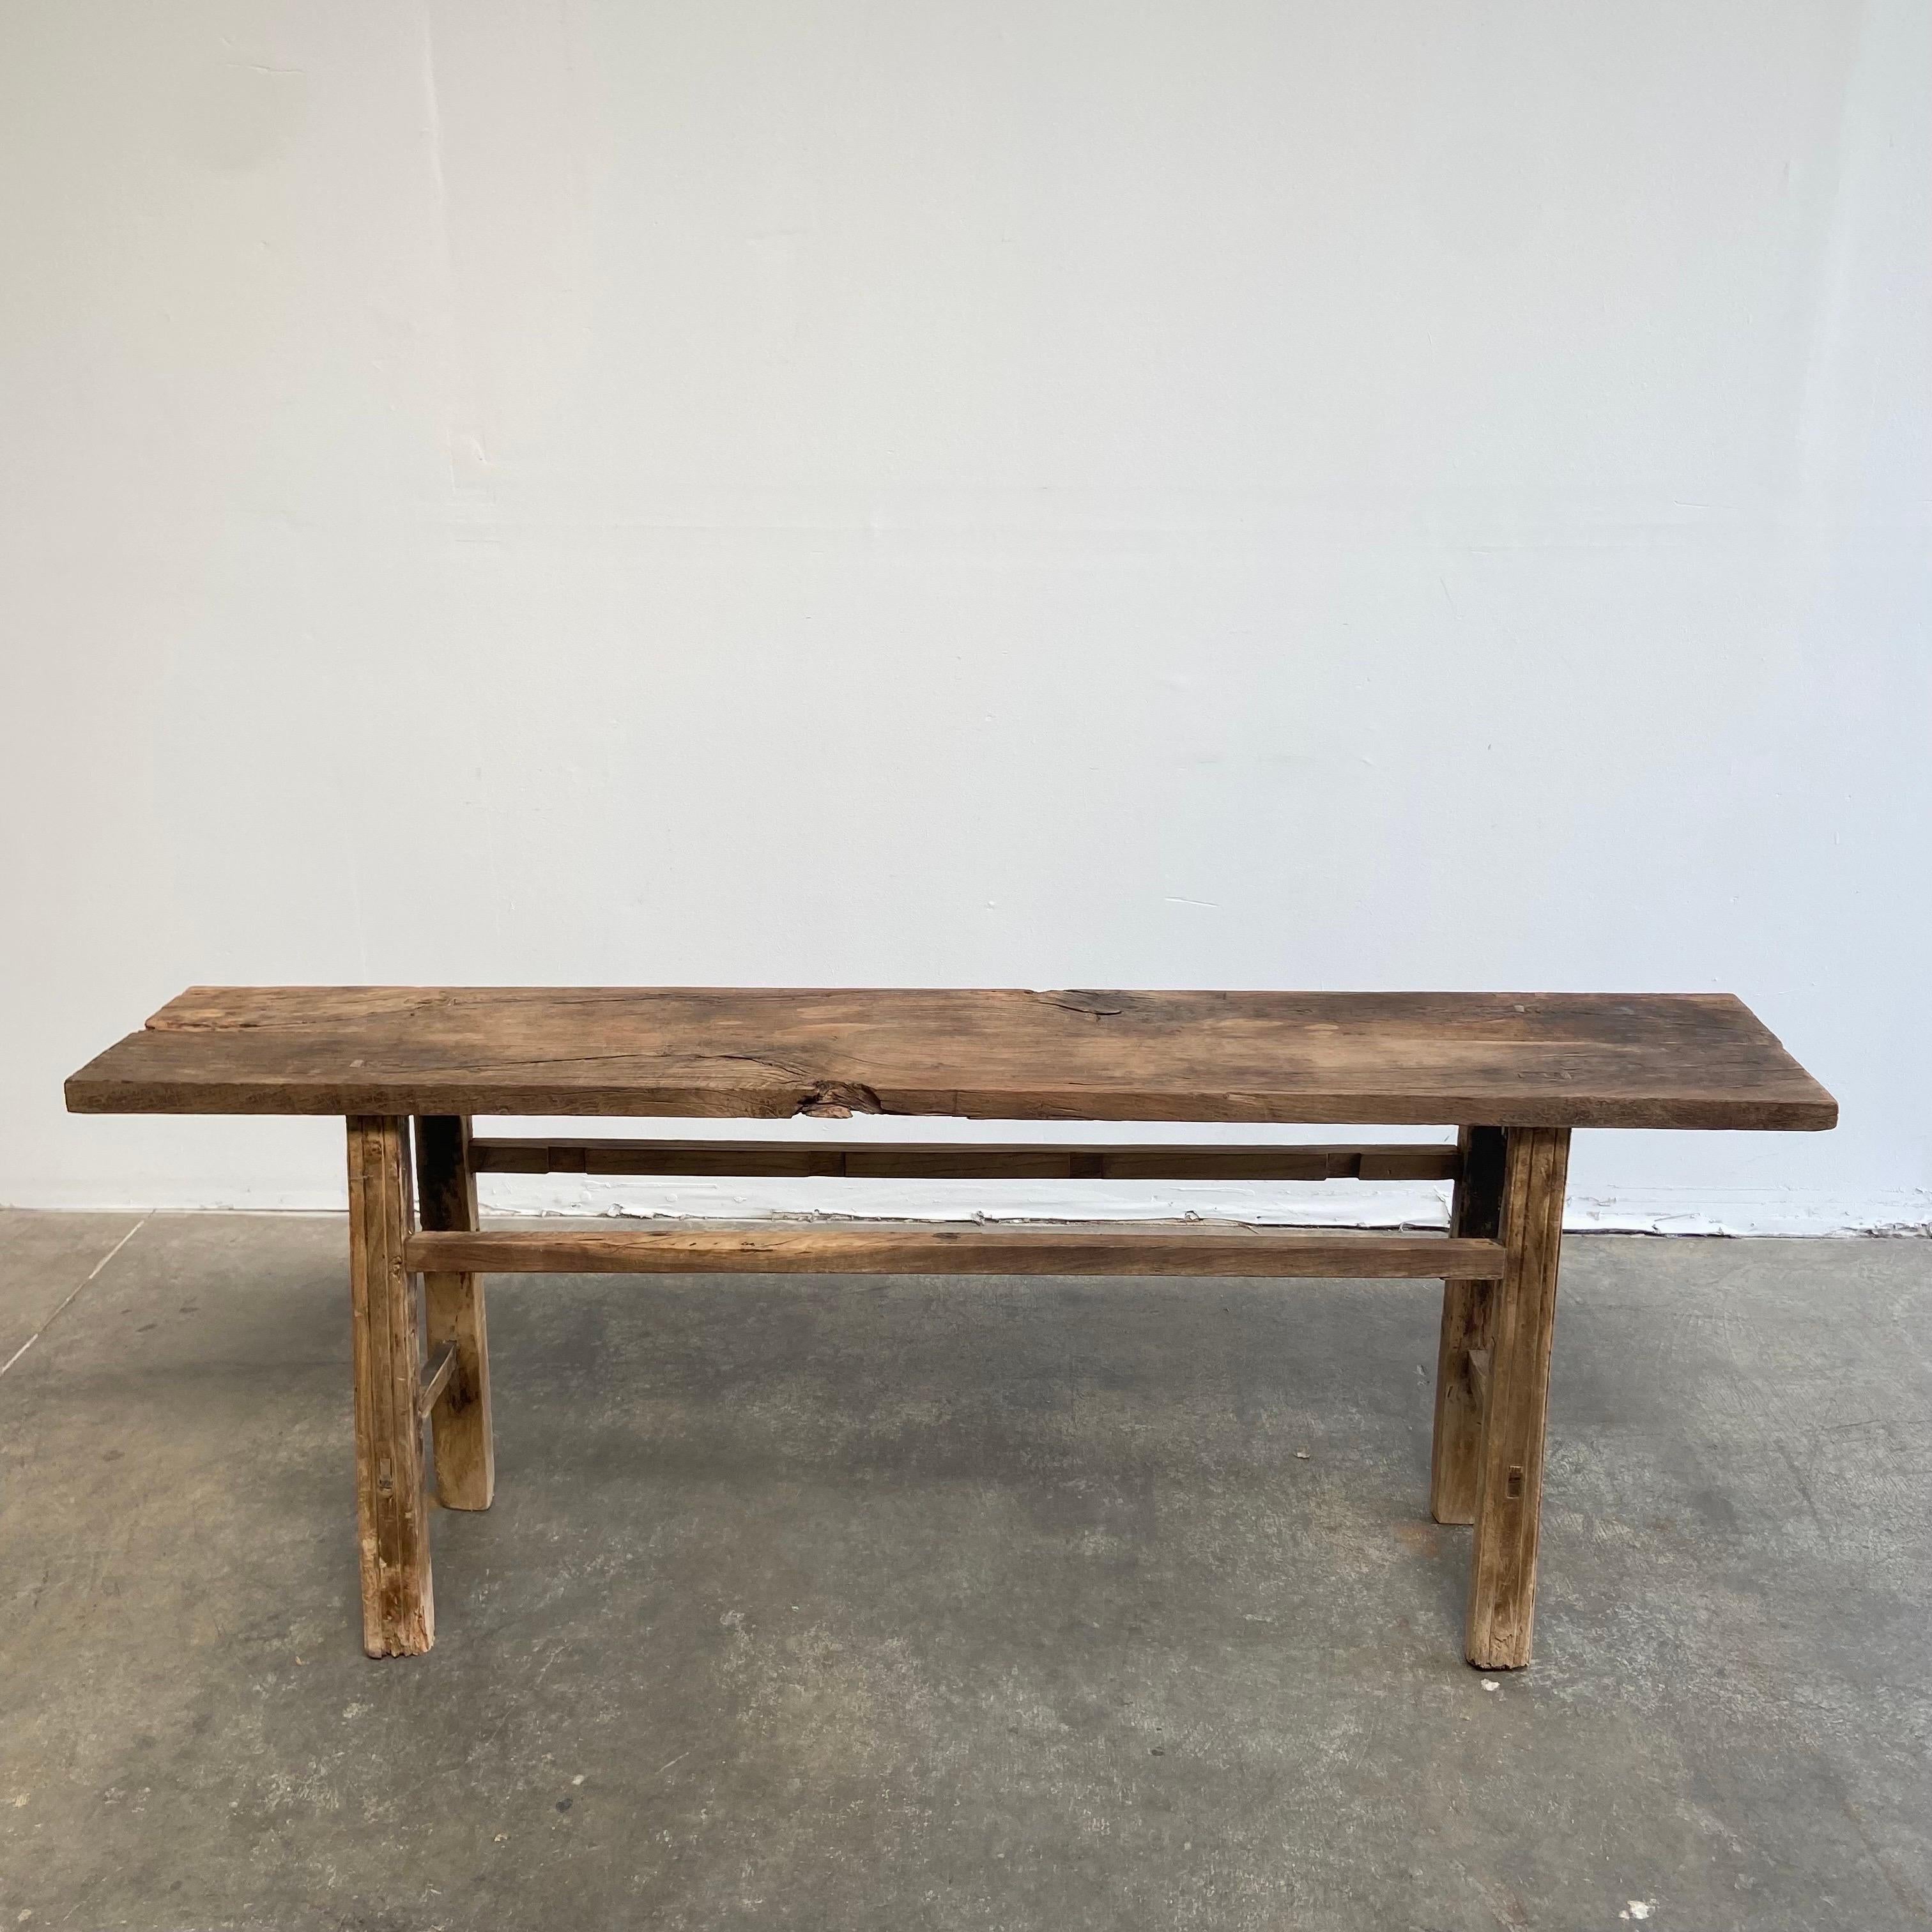 Dark elm console. Vintage Antique Elm Wood Console Table Beautiful antique patina, with weathering and age, these are solid and sturdy ready for daily use, use as an entry table, sofa table or console in a dining room. Great in a living room with